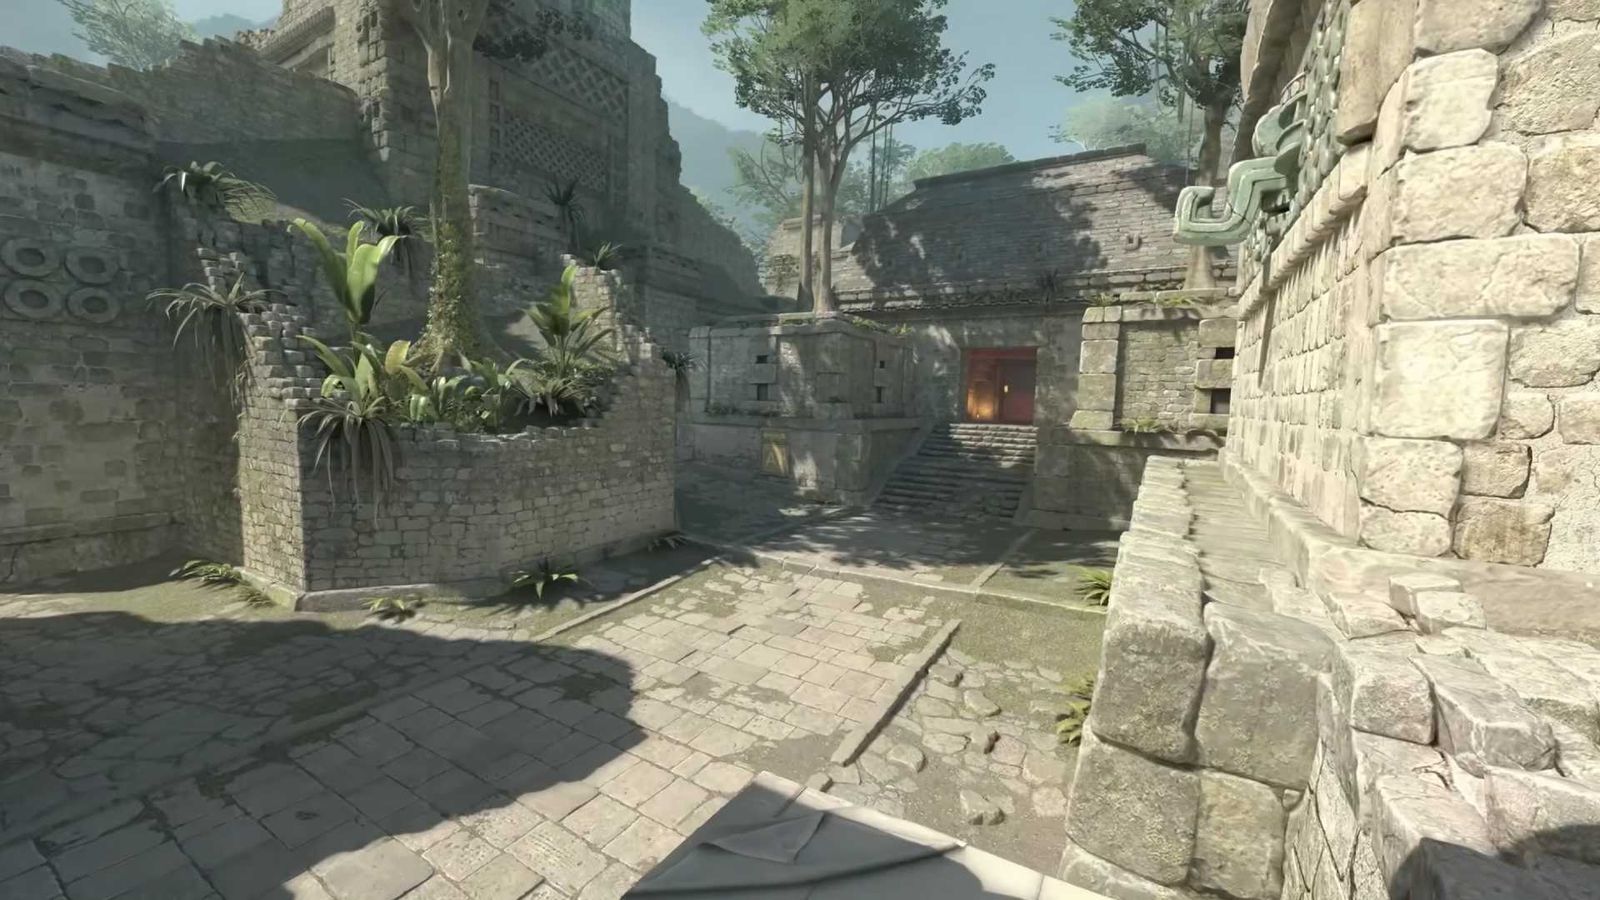 A stone-filled area in a map from Counter Strike 2.